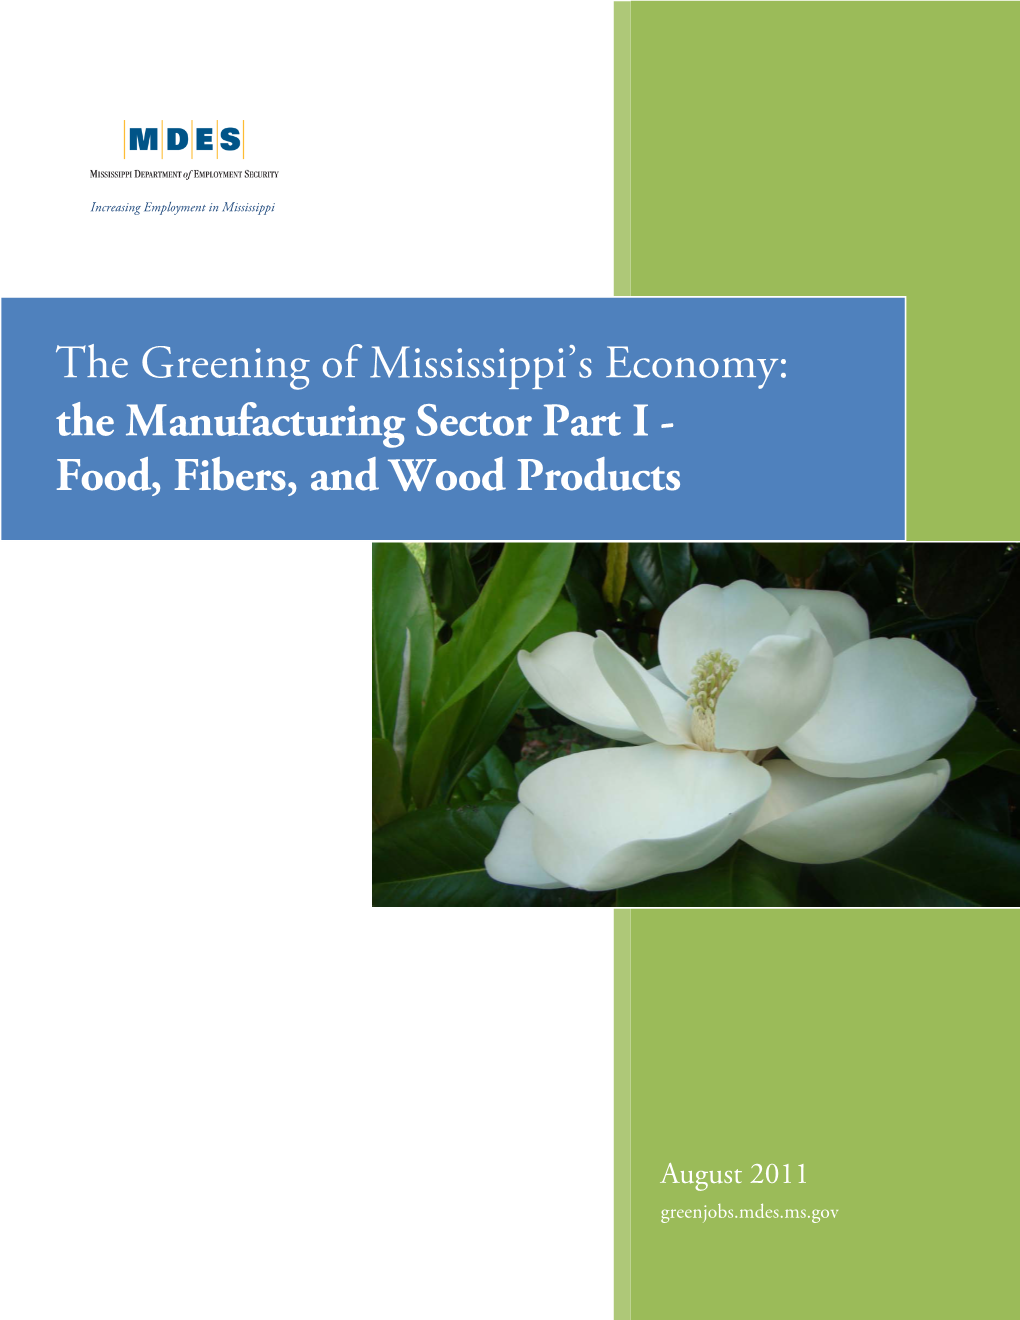 The Greening of Mississippi's Economy: the Manufacturing Sector